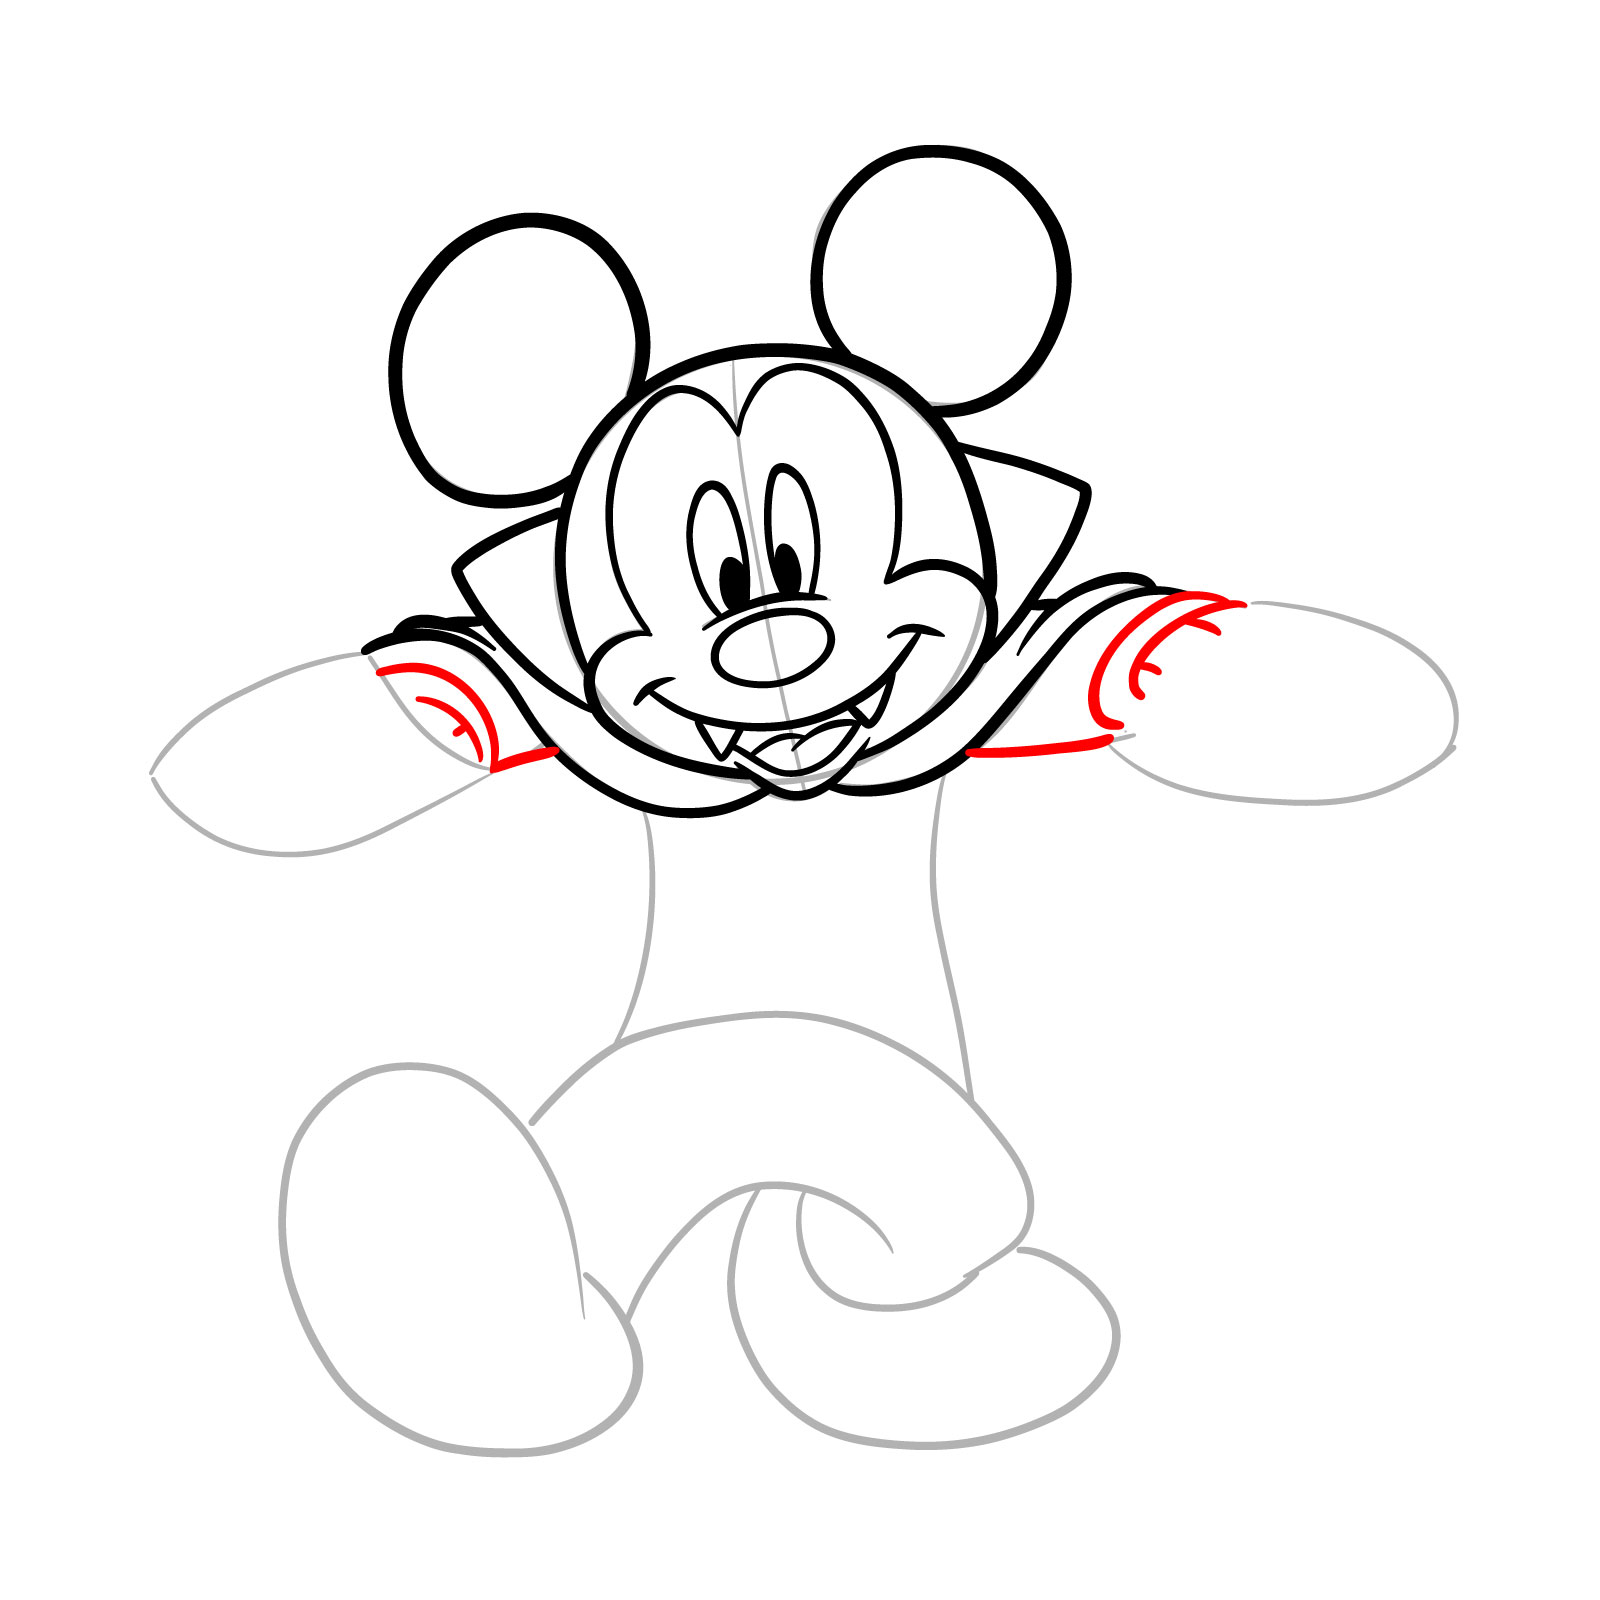 How to draw Dracula Mickey Mouse - step 14